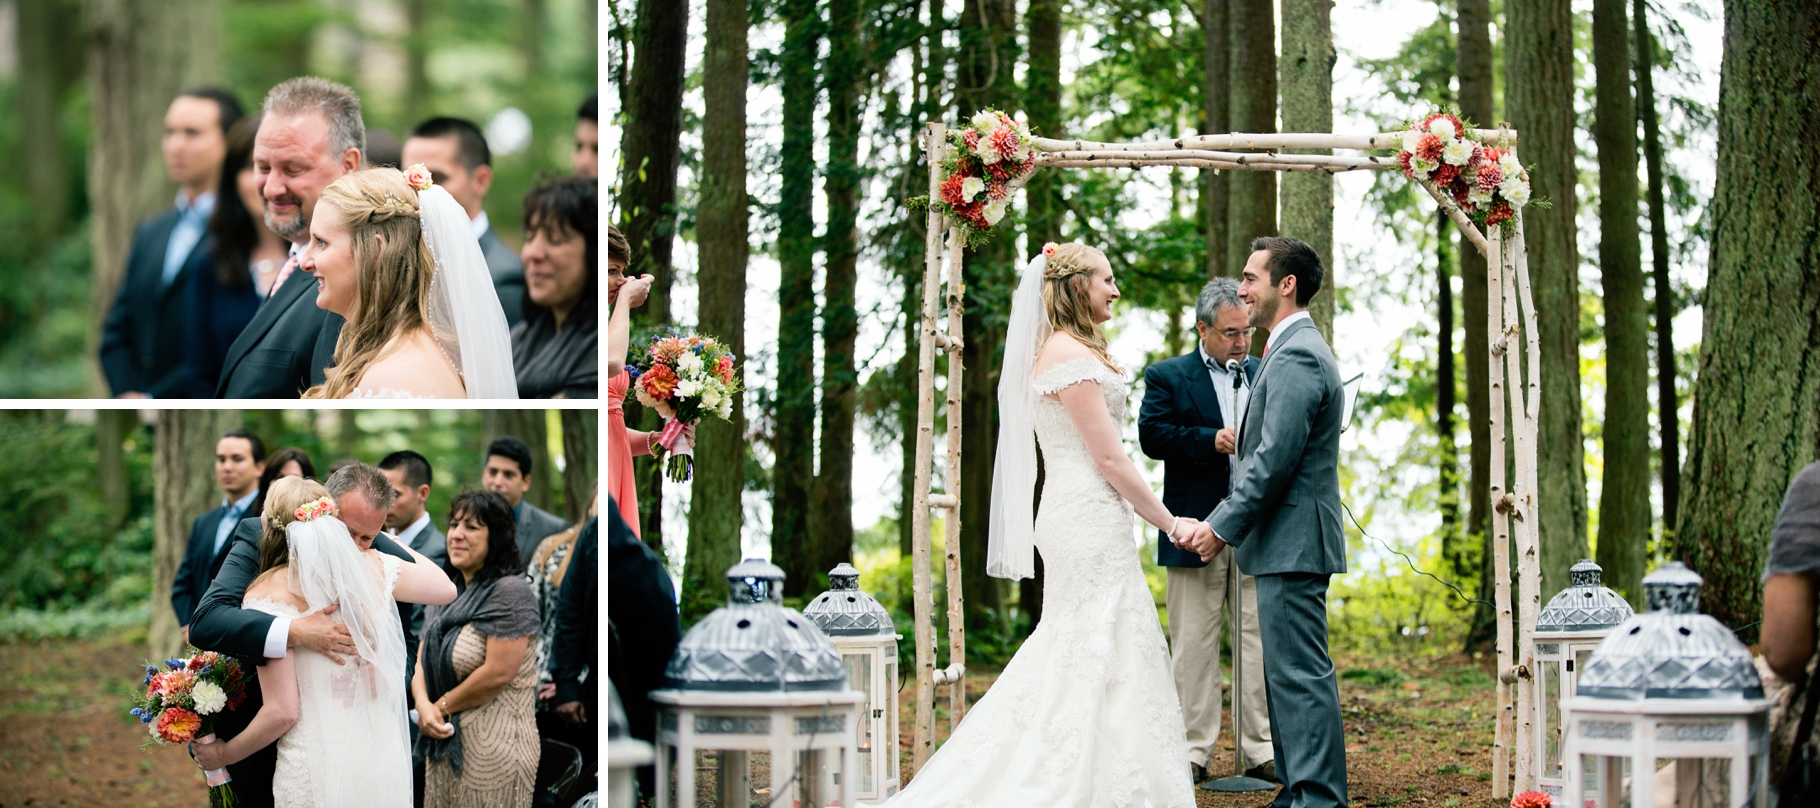 33-Ceremony-Bride-Groom-Vows-wooded-bluff-olympic-mountains-Kitsap-Memorial-State-Park-Forest-Northwest-Photographer-Seattle-Wedding-Photography-by-Betty-Elaine